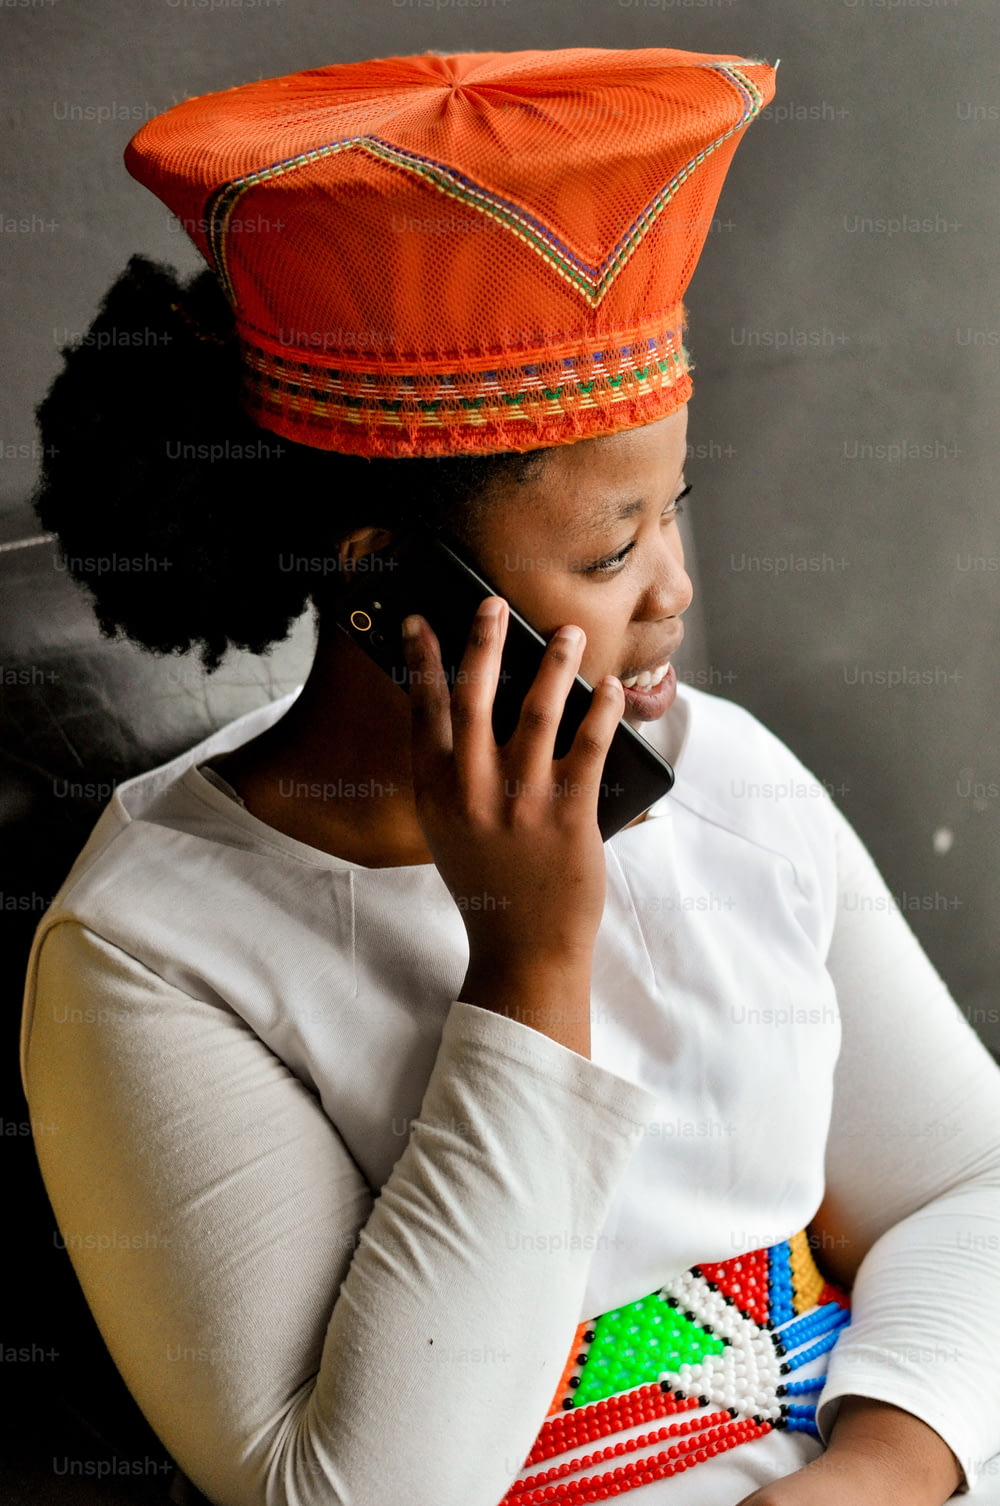 a woman wearing an orange hat talking on a cell phone